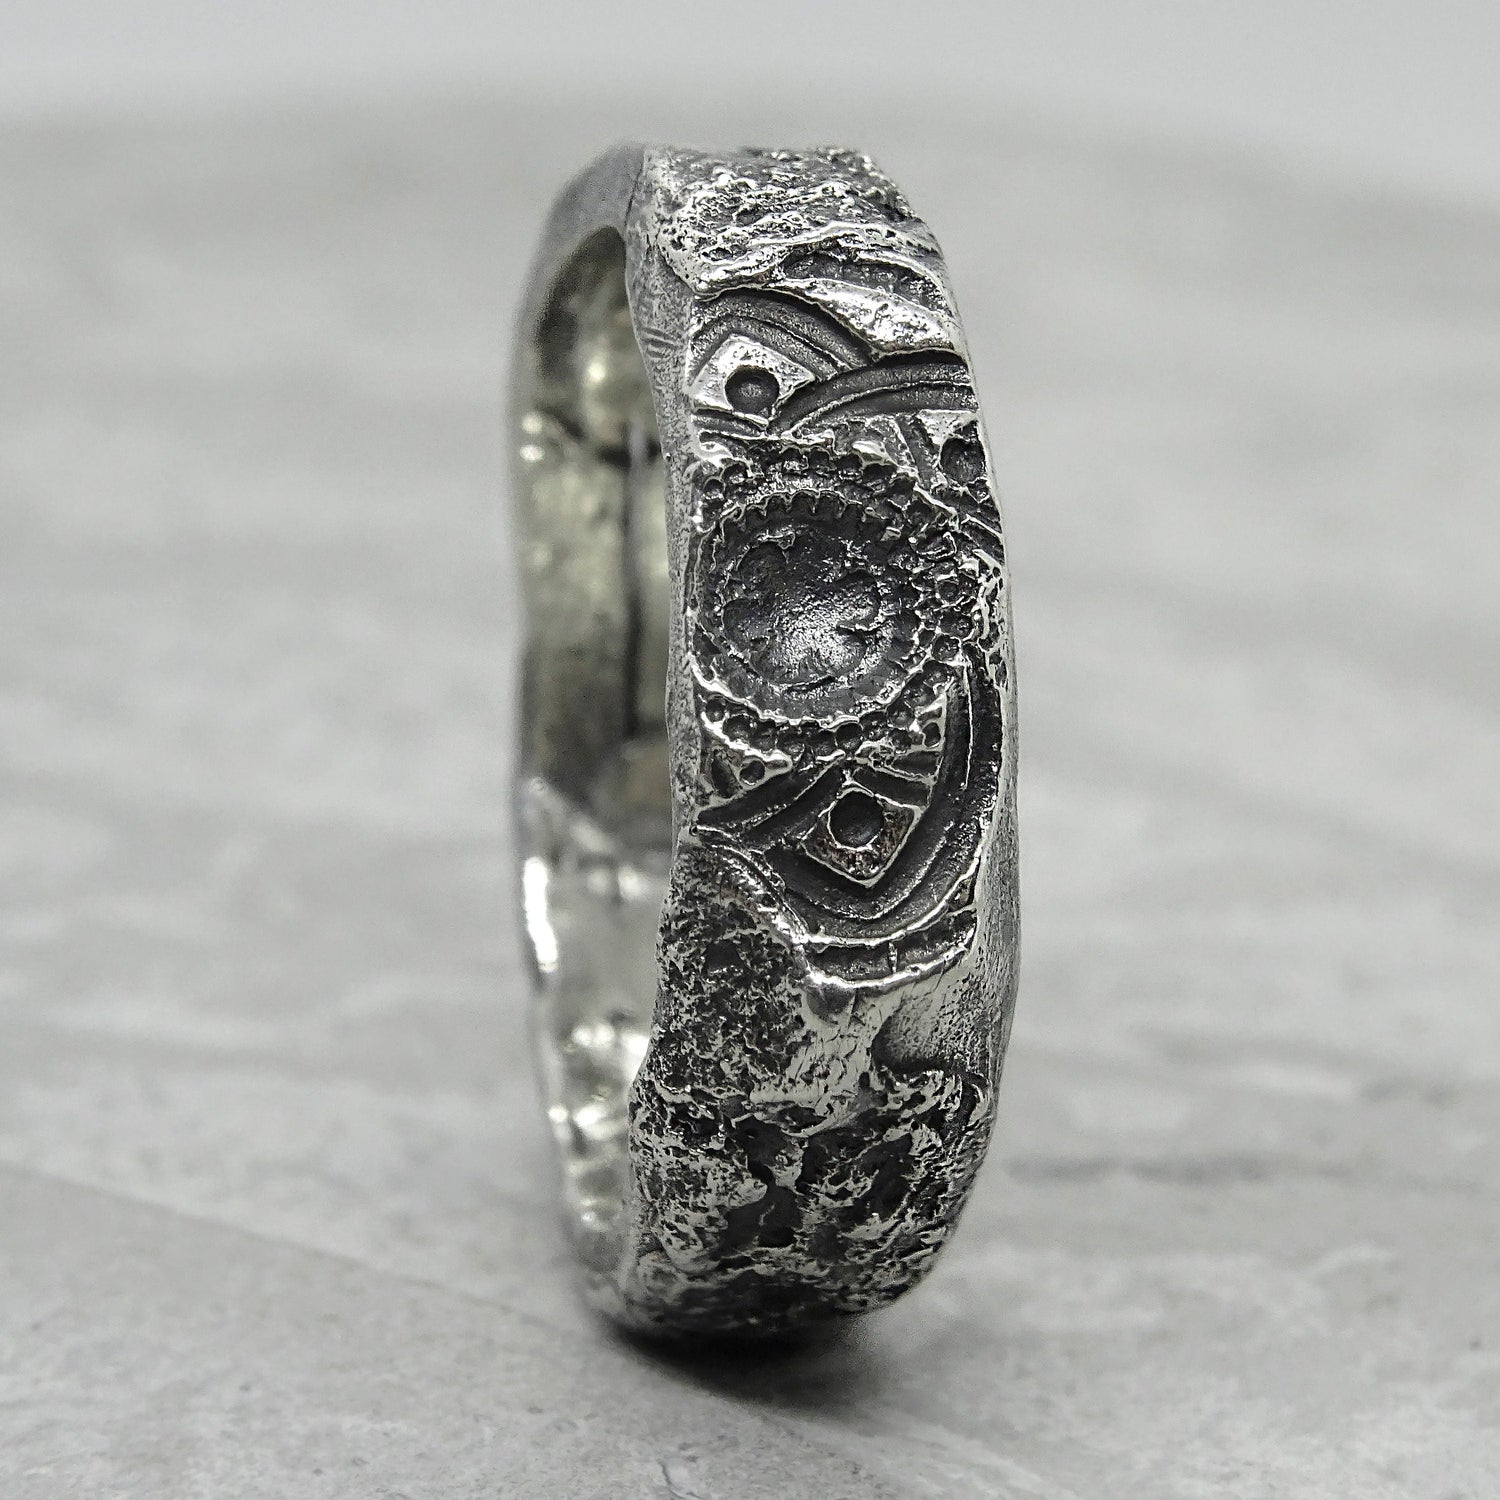 Mandala ring- textured ring with a rich structure and ethnic pattern Rings with patterns Project50g 